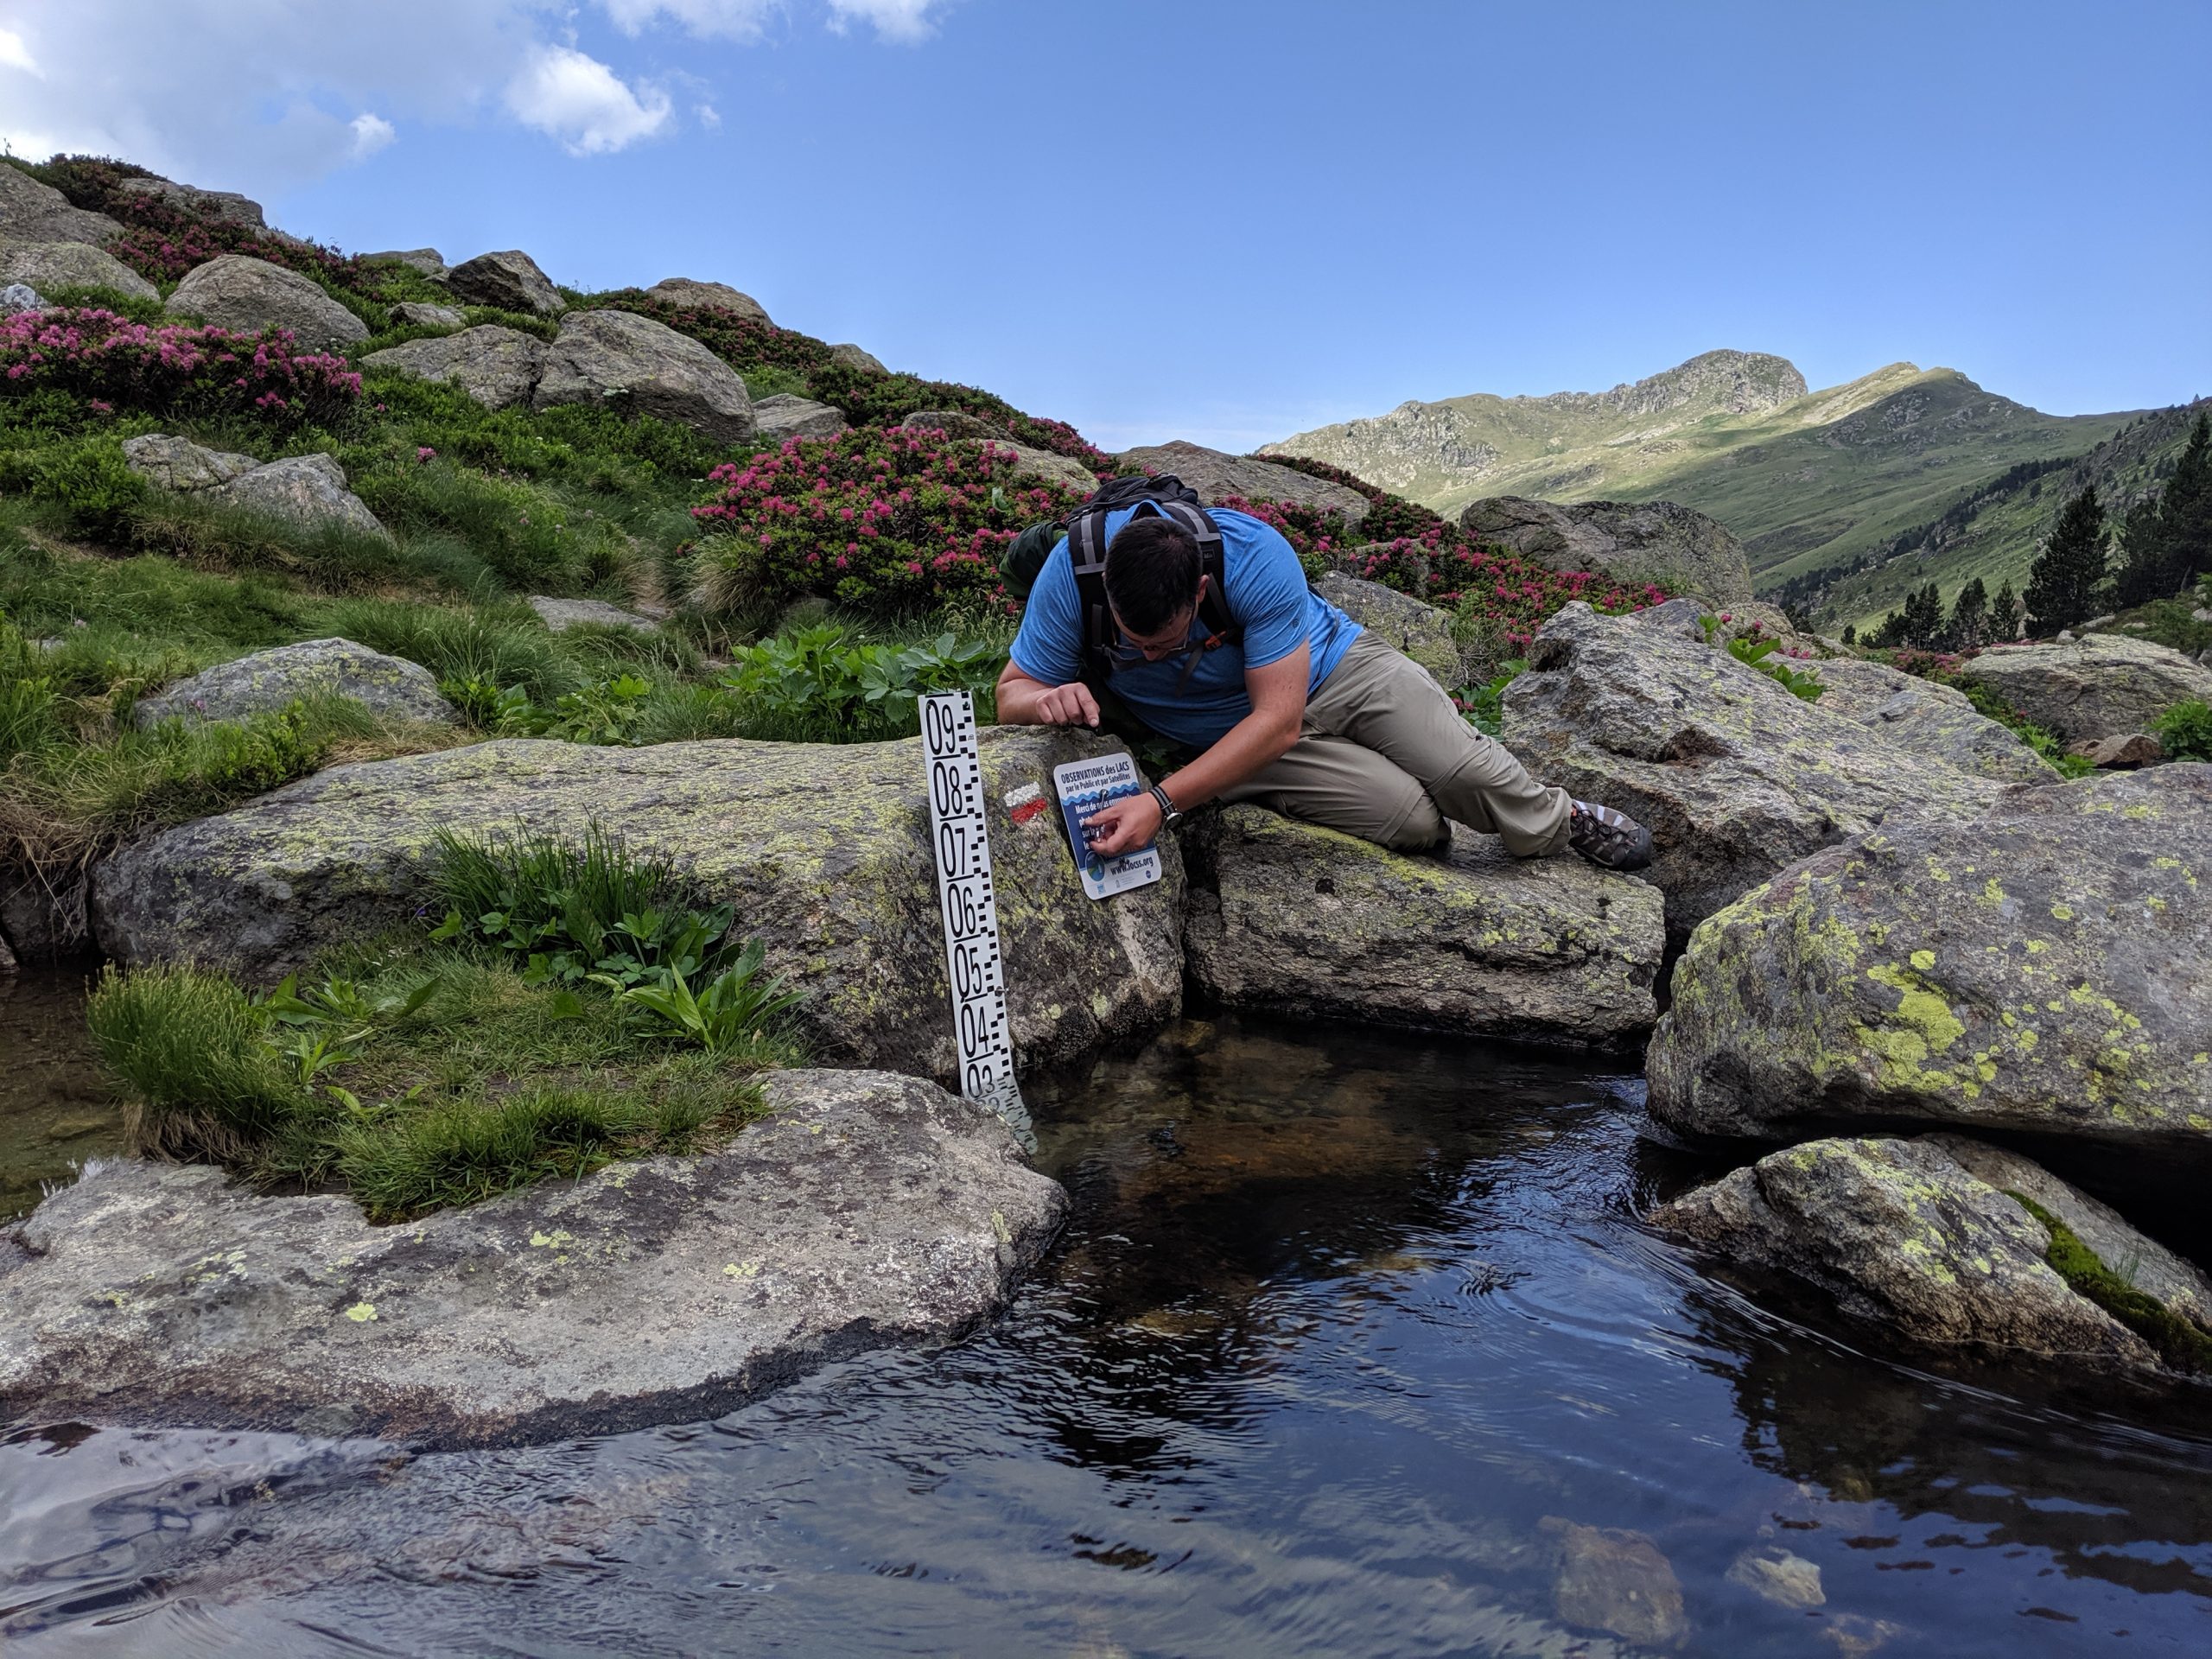 In early July, the LOCSS team made a trip to France to begin studying four new lakes in the Pyrenees of southwest France.